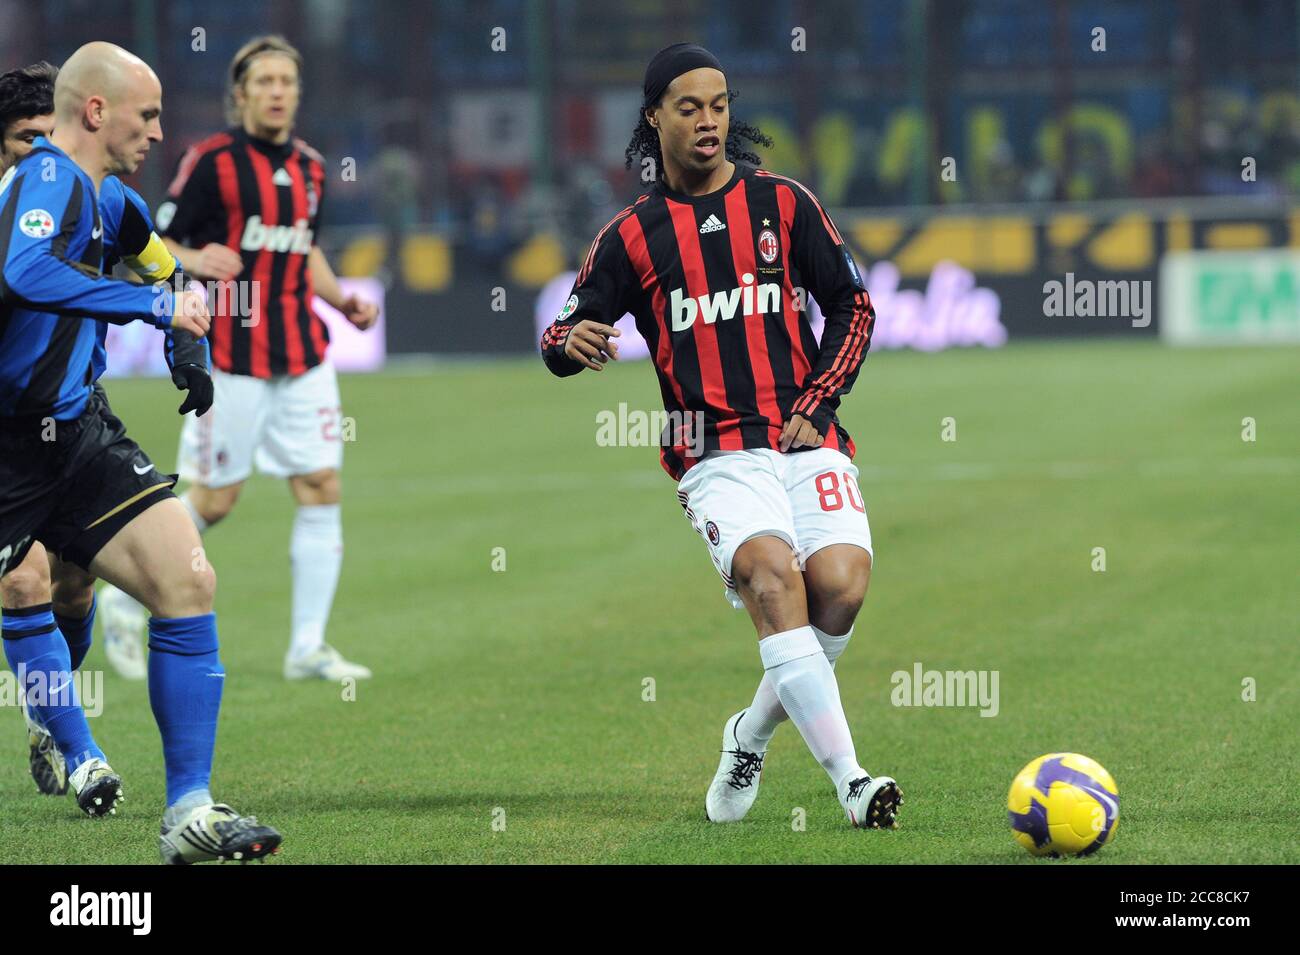 Milan  Italy  15 February 2009, 'G.MEAZZA SAN SIRO ' Stadium, Serious Football Championship A 2008/2009, FC Inter - AC Milan : Ronaldinho in action during the match Stock Photo